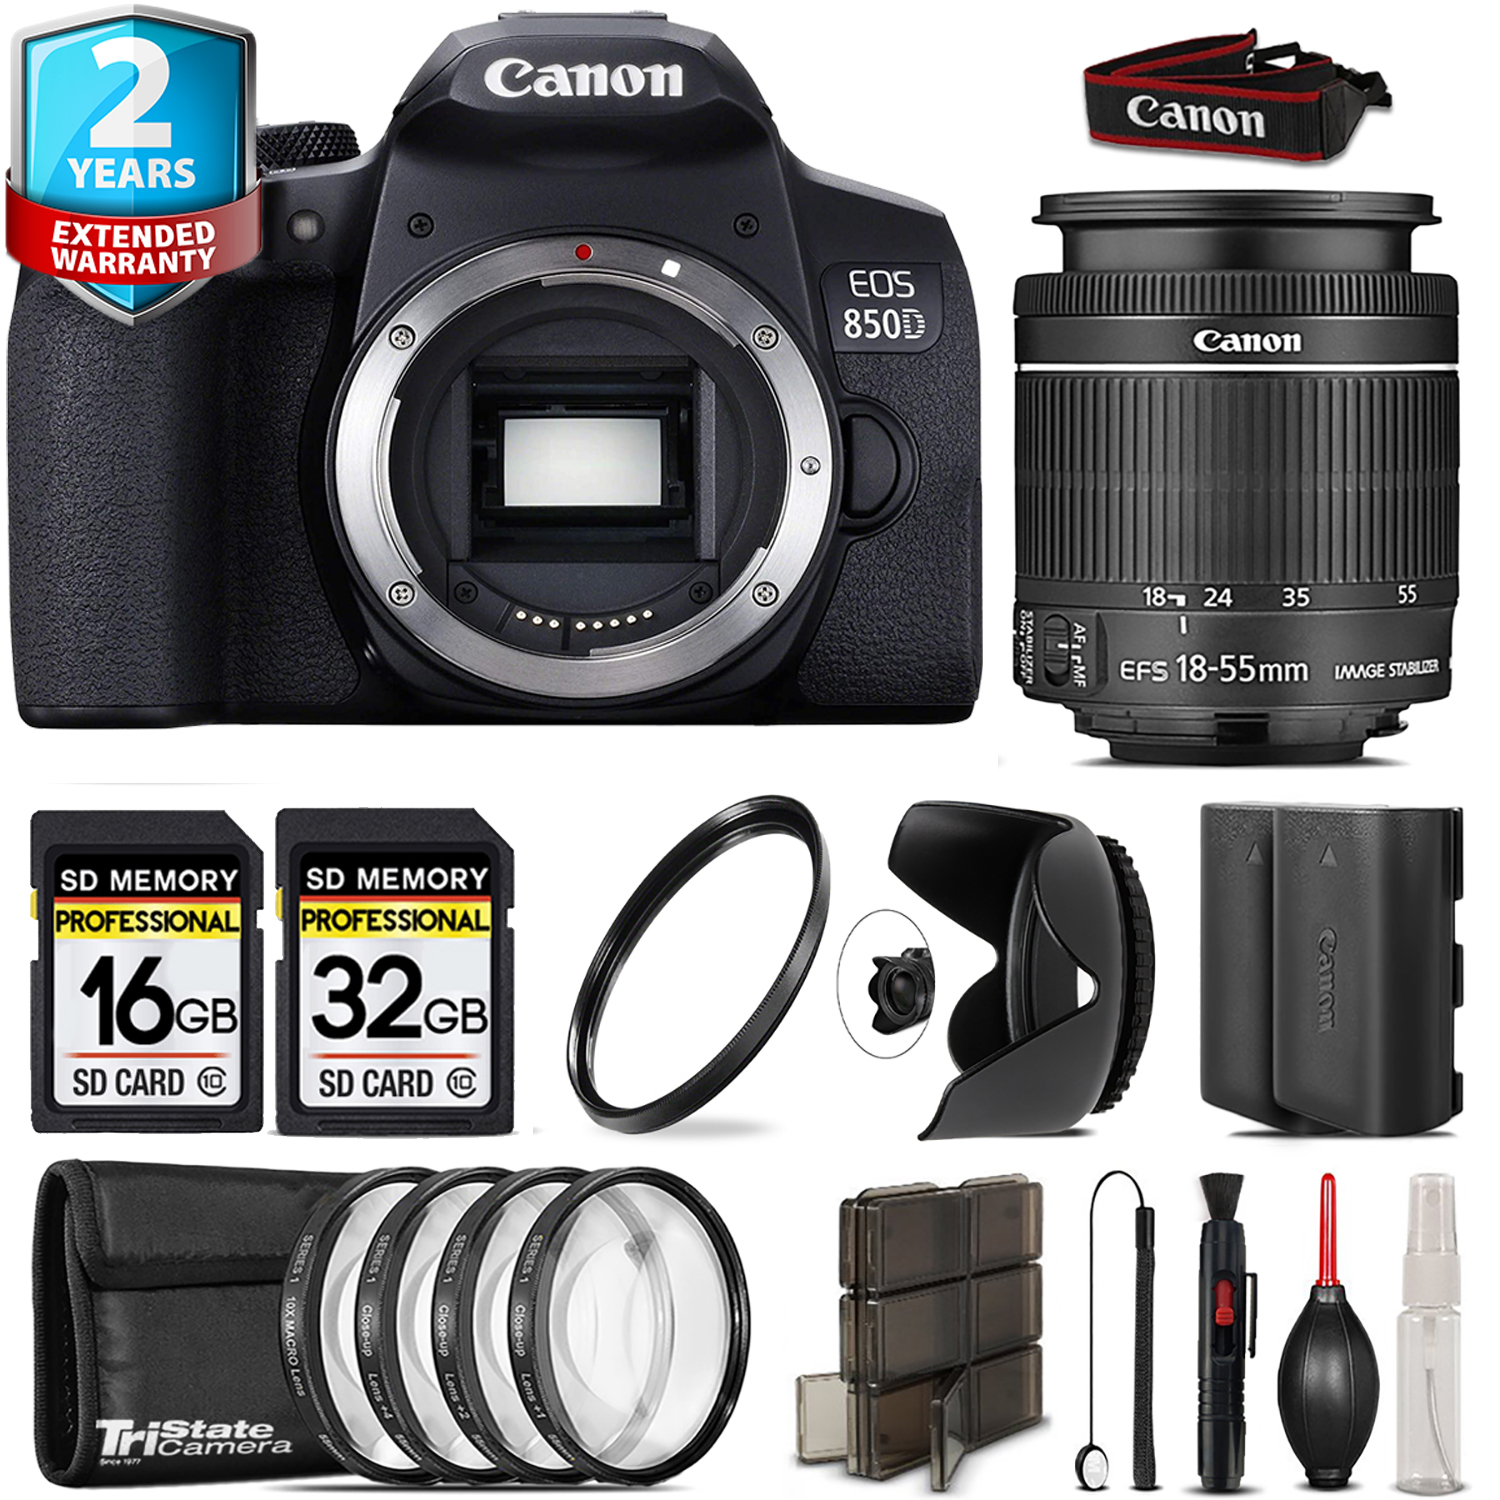 EOS 850D (Rebel T8i) + 18-55mm IS STM + 4 Piece Macro Set + Extra Battery - 48GB *FREE SHIPPING*